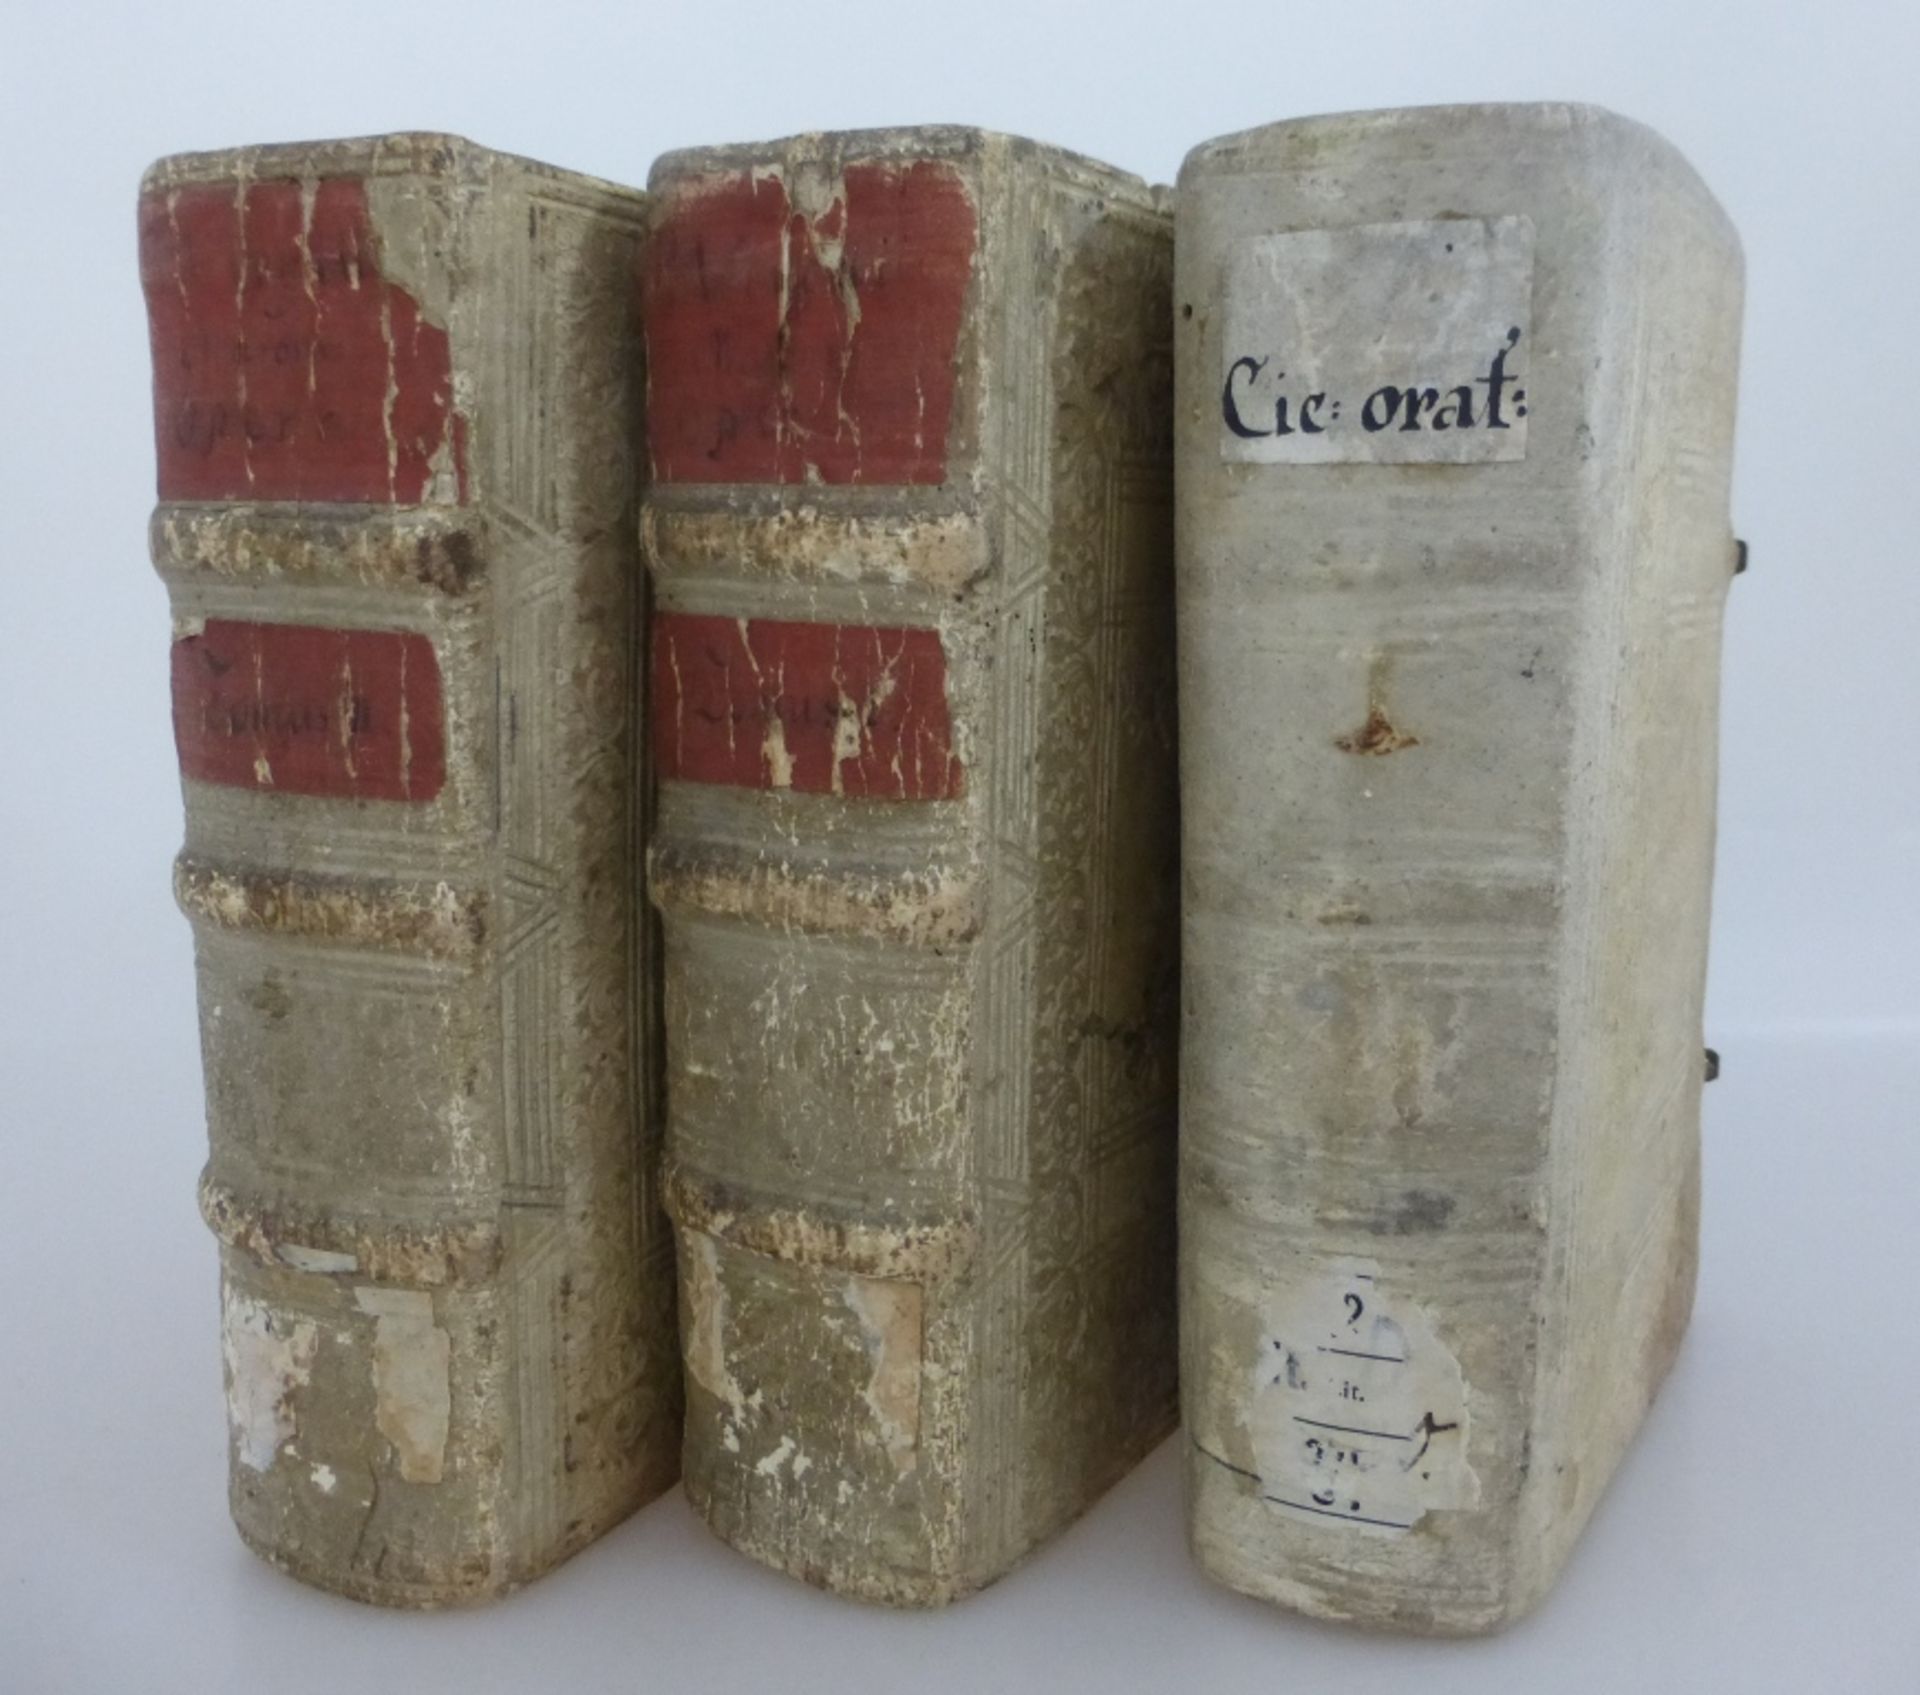 3 Bücher, Anfang 18.Jh., Commentarius in Selectas ciceronis orationes, Pars I, 1718, 608